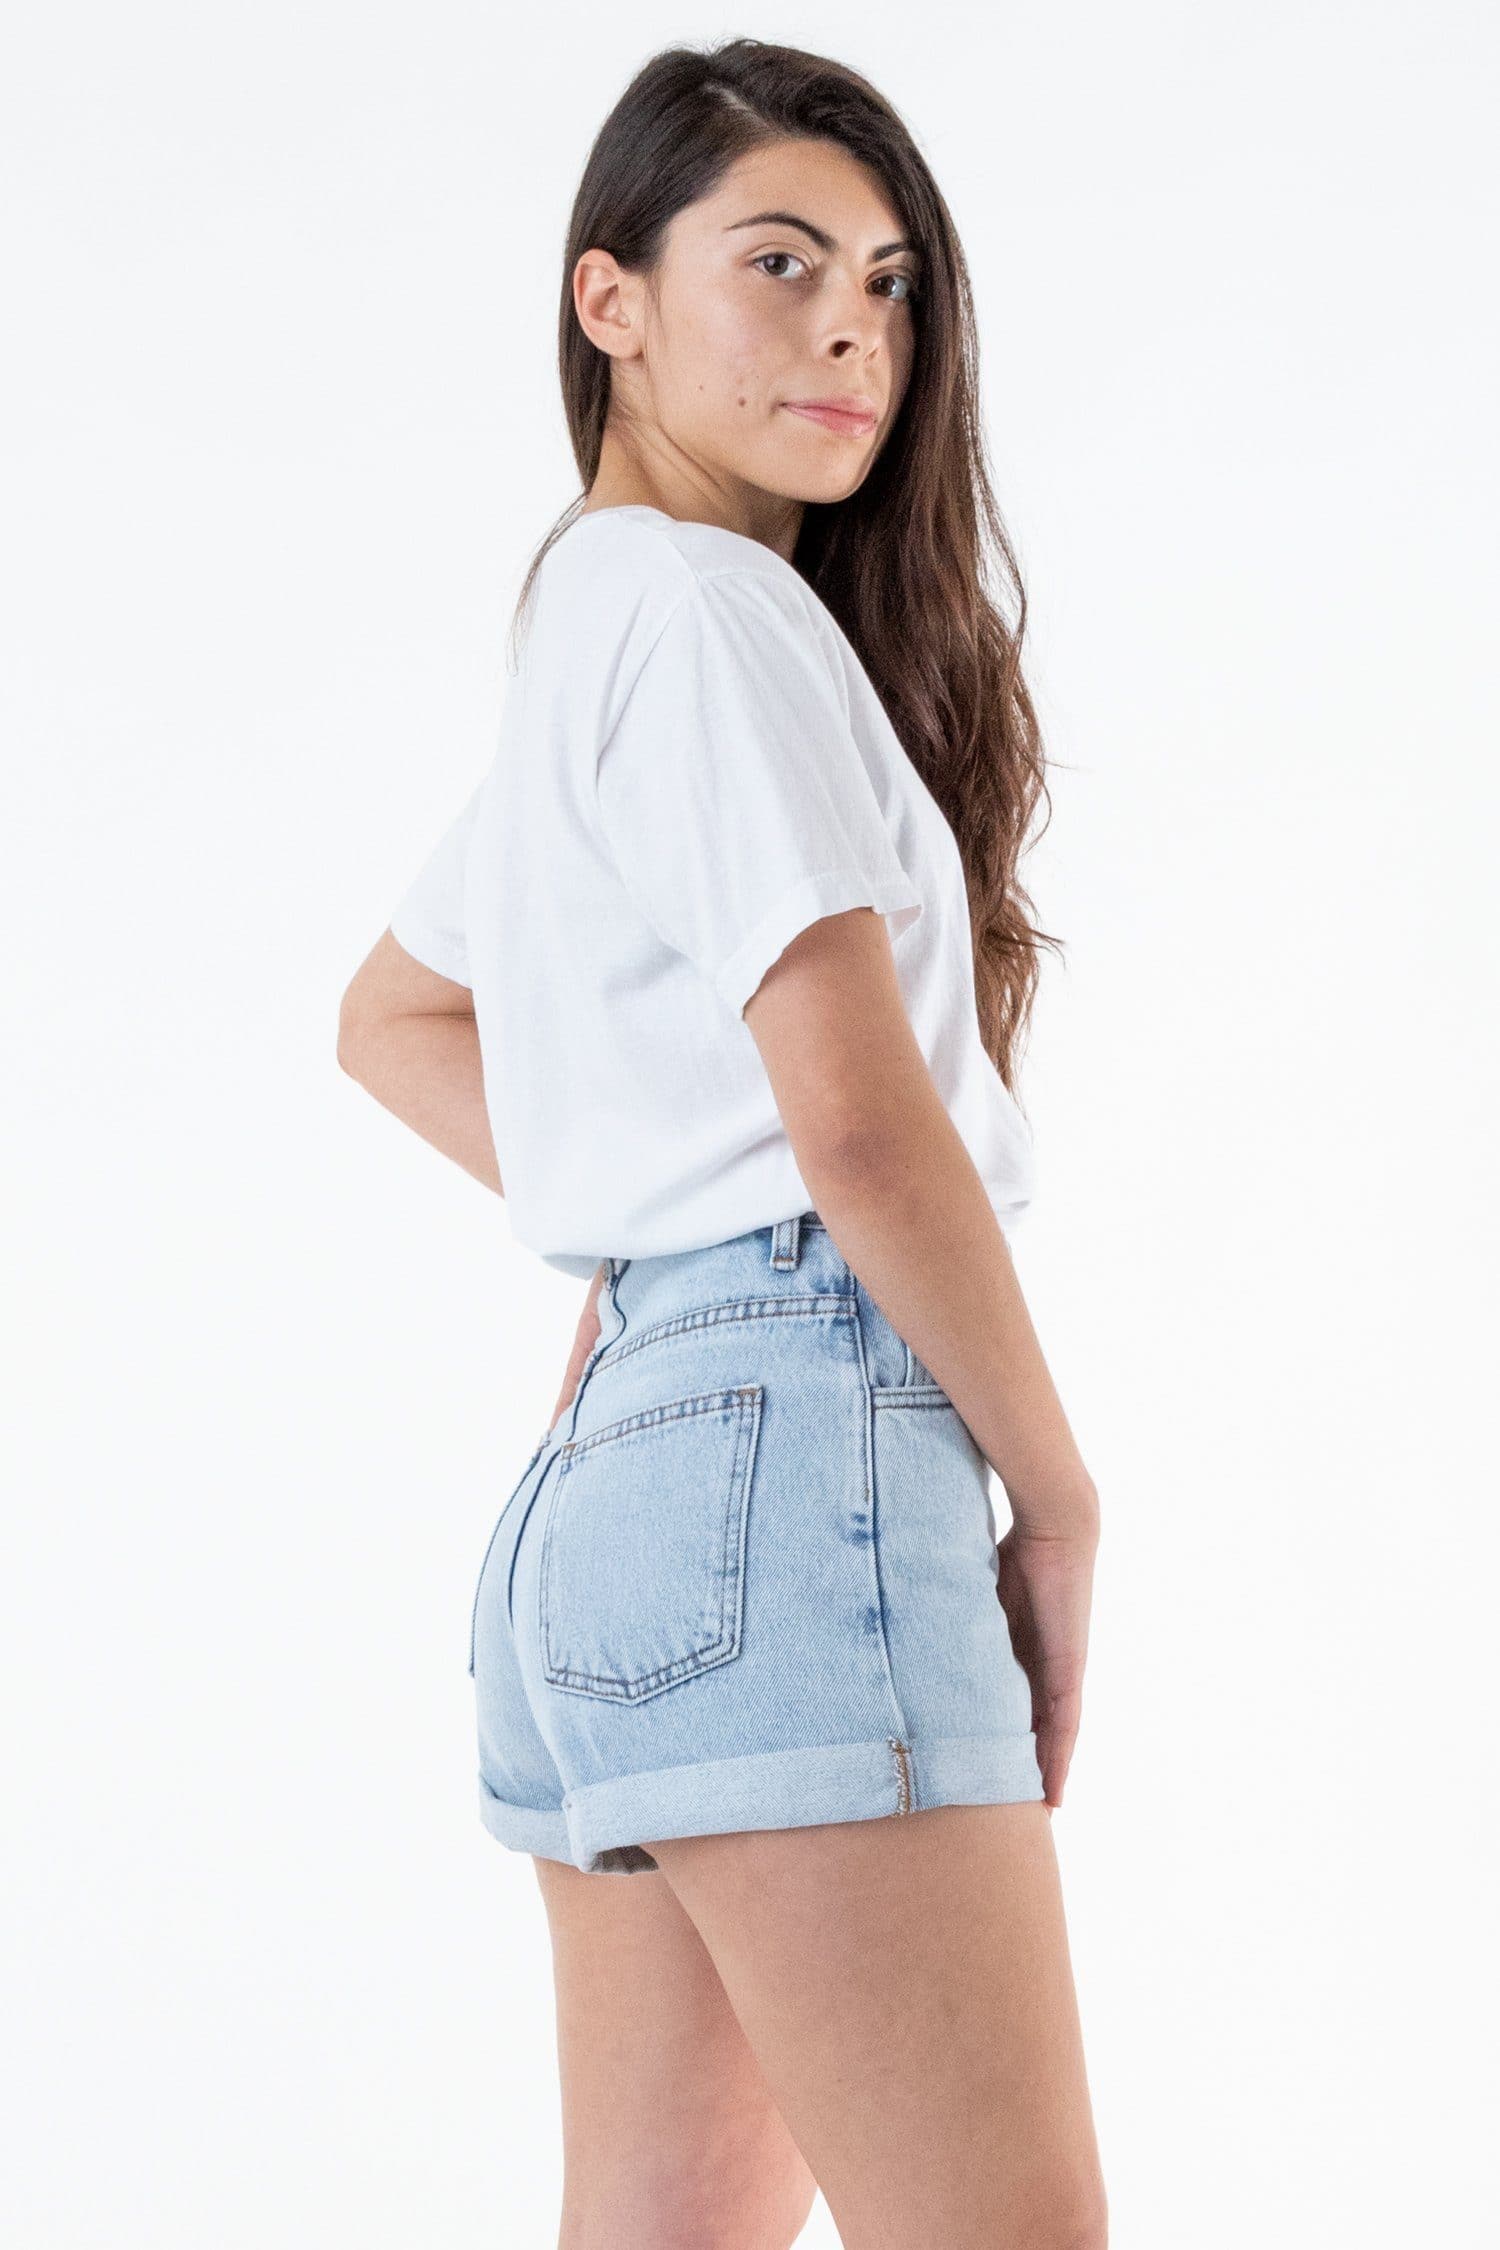 Sofia Jeans - Jean Shorts 2022 Review! Now Available in Sizes 0 - 28!